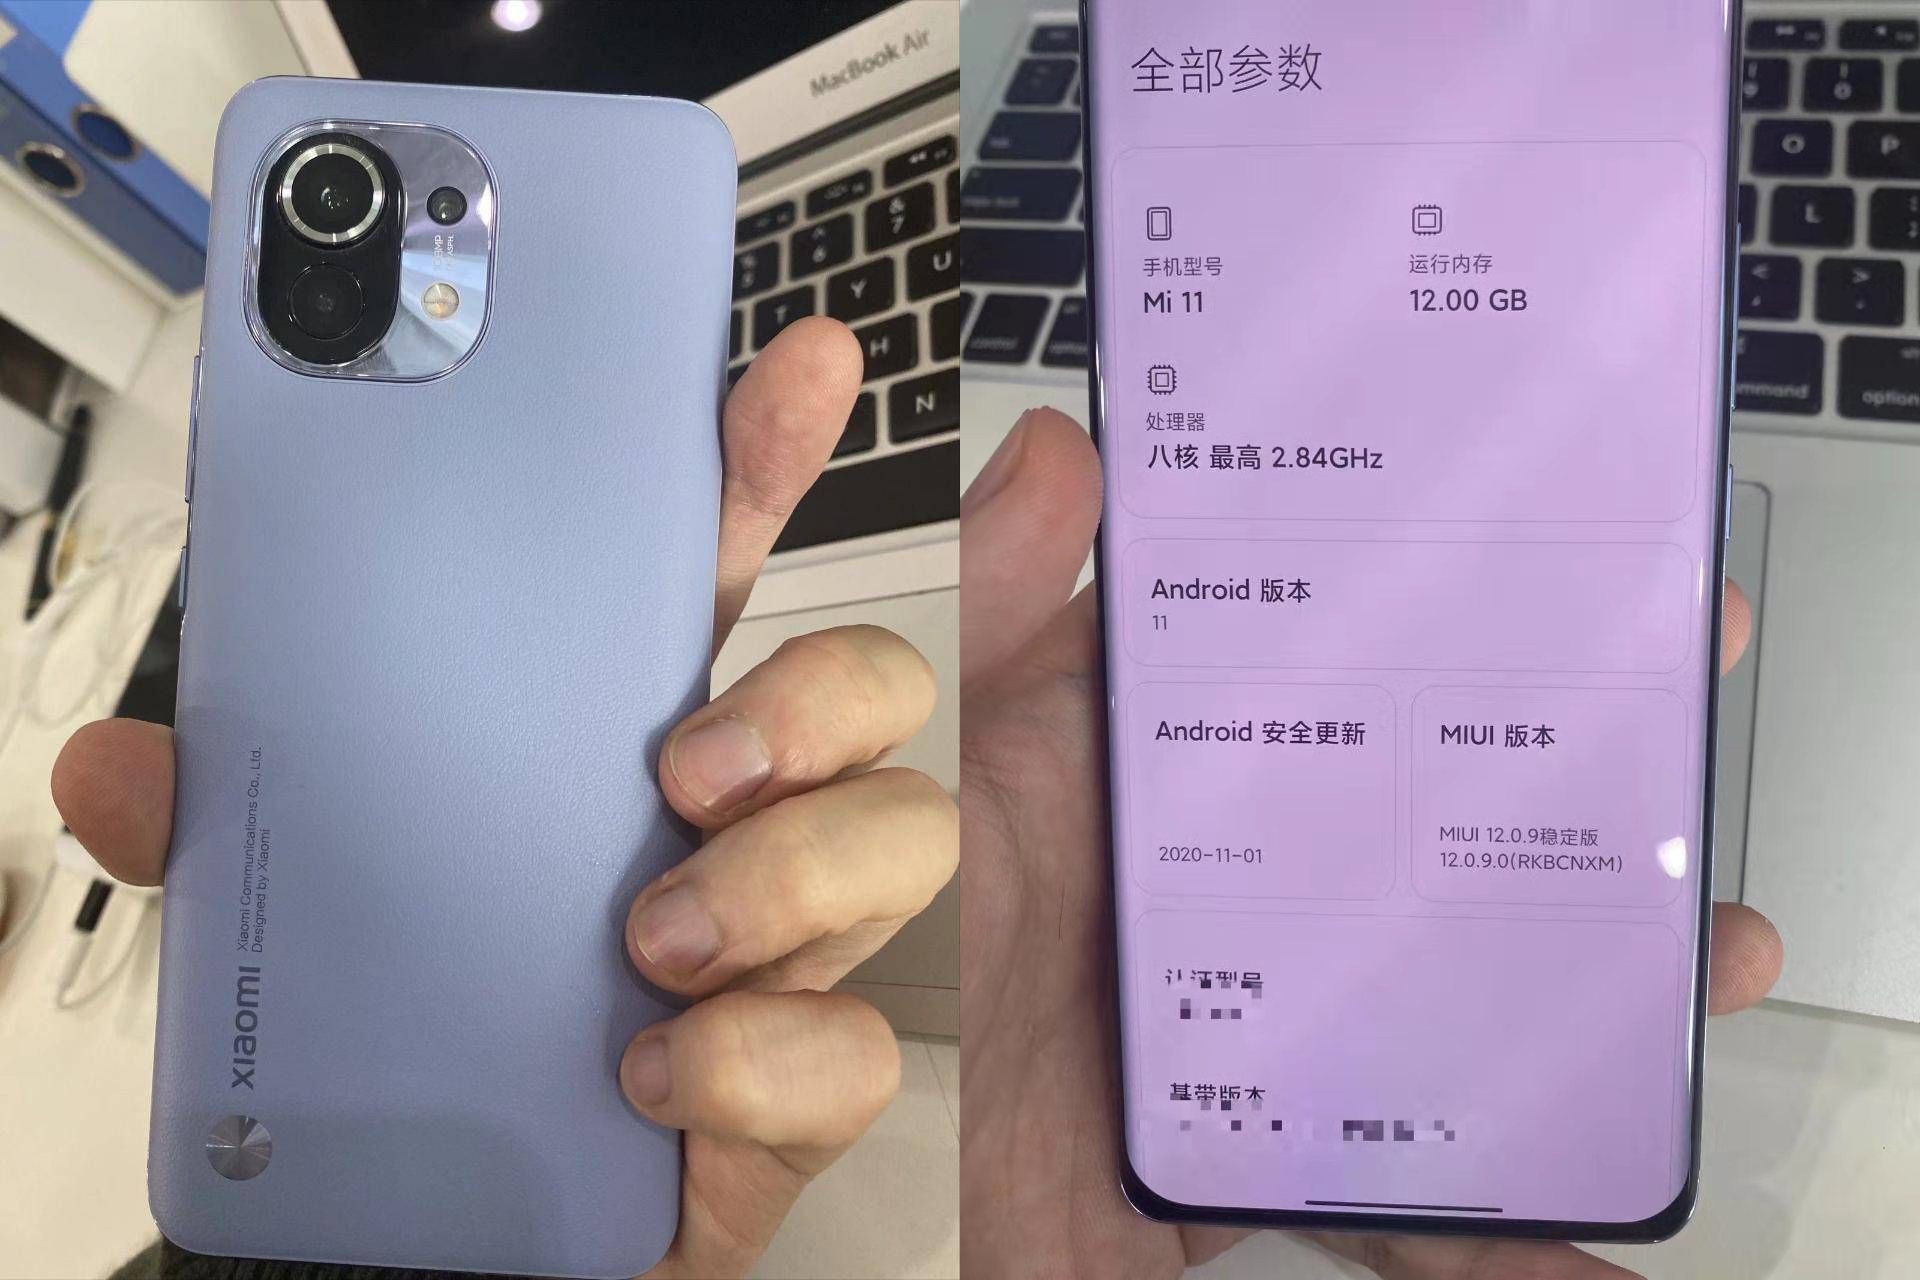 Live Images of the Xiaomi Mi 11 Emerge; Reveals True Design and A Few Specifications